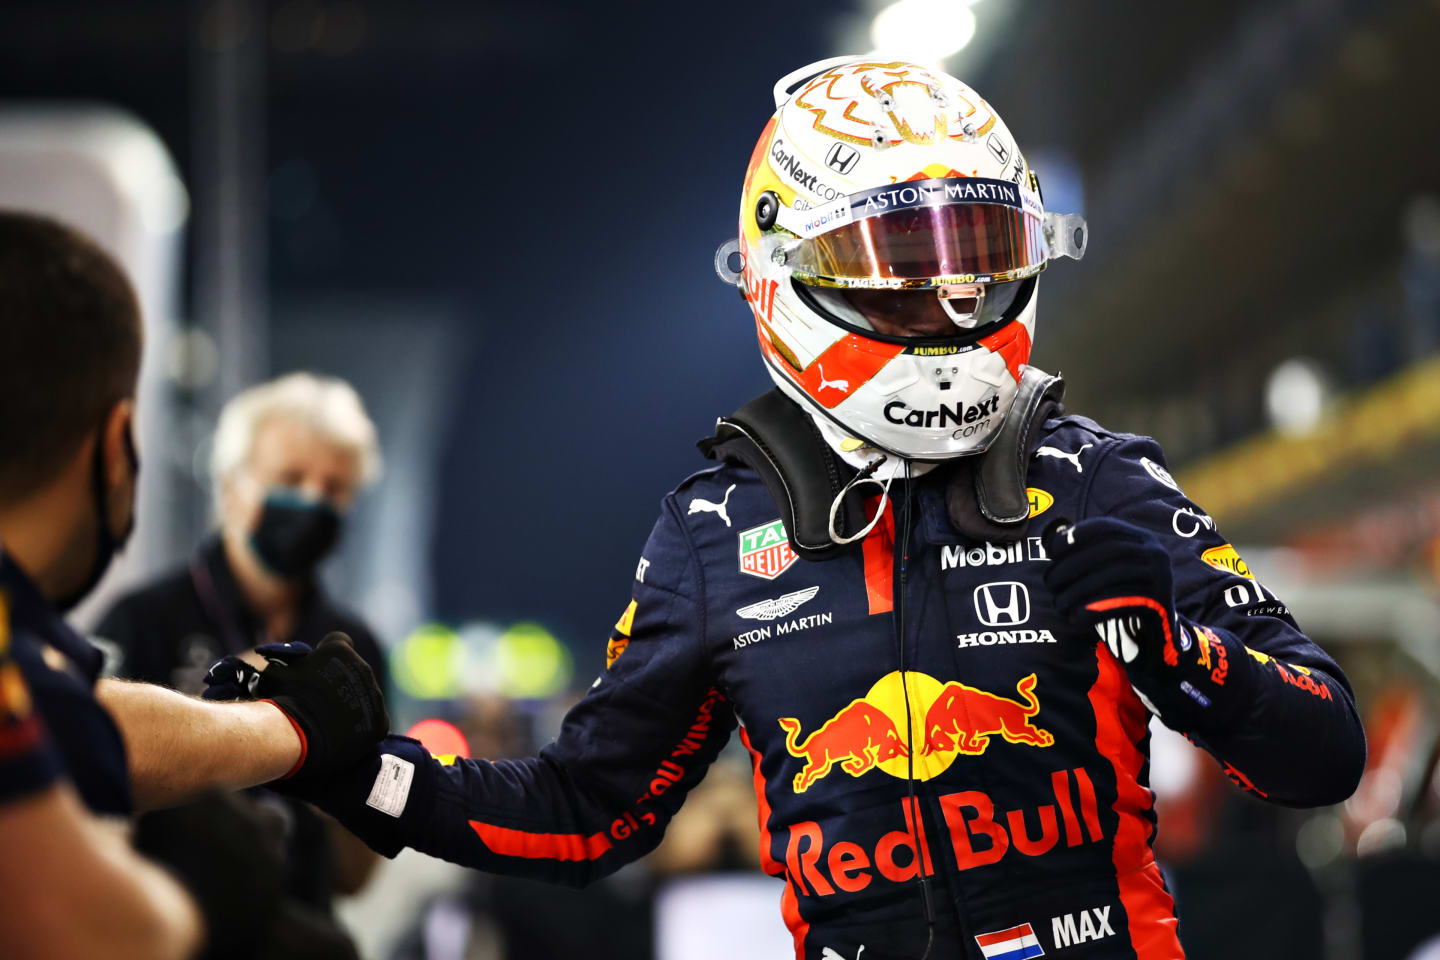 ABU DHABI, UNITED ARAB EMIRATES - DECEMBER 12: Pole position qualifier Max Verstappen of Netherlands and Red Bull Racing celebrates with his team in parc ferme during qualifying ahead of the F1 Grand Prix of Abu Dhabi at Yas Marina Circuit on December 12, 2020 in Abu Dhabi, United Arab Emirates. (Photo by Mark Thompson/Getty Images)